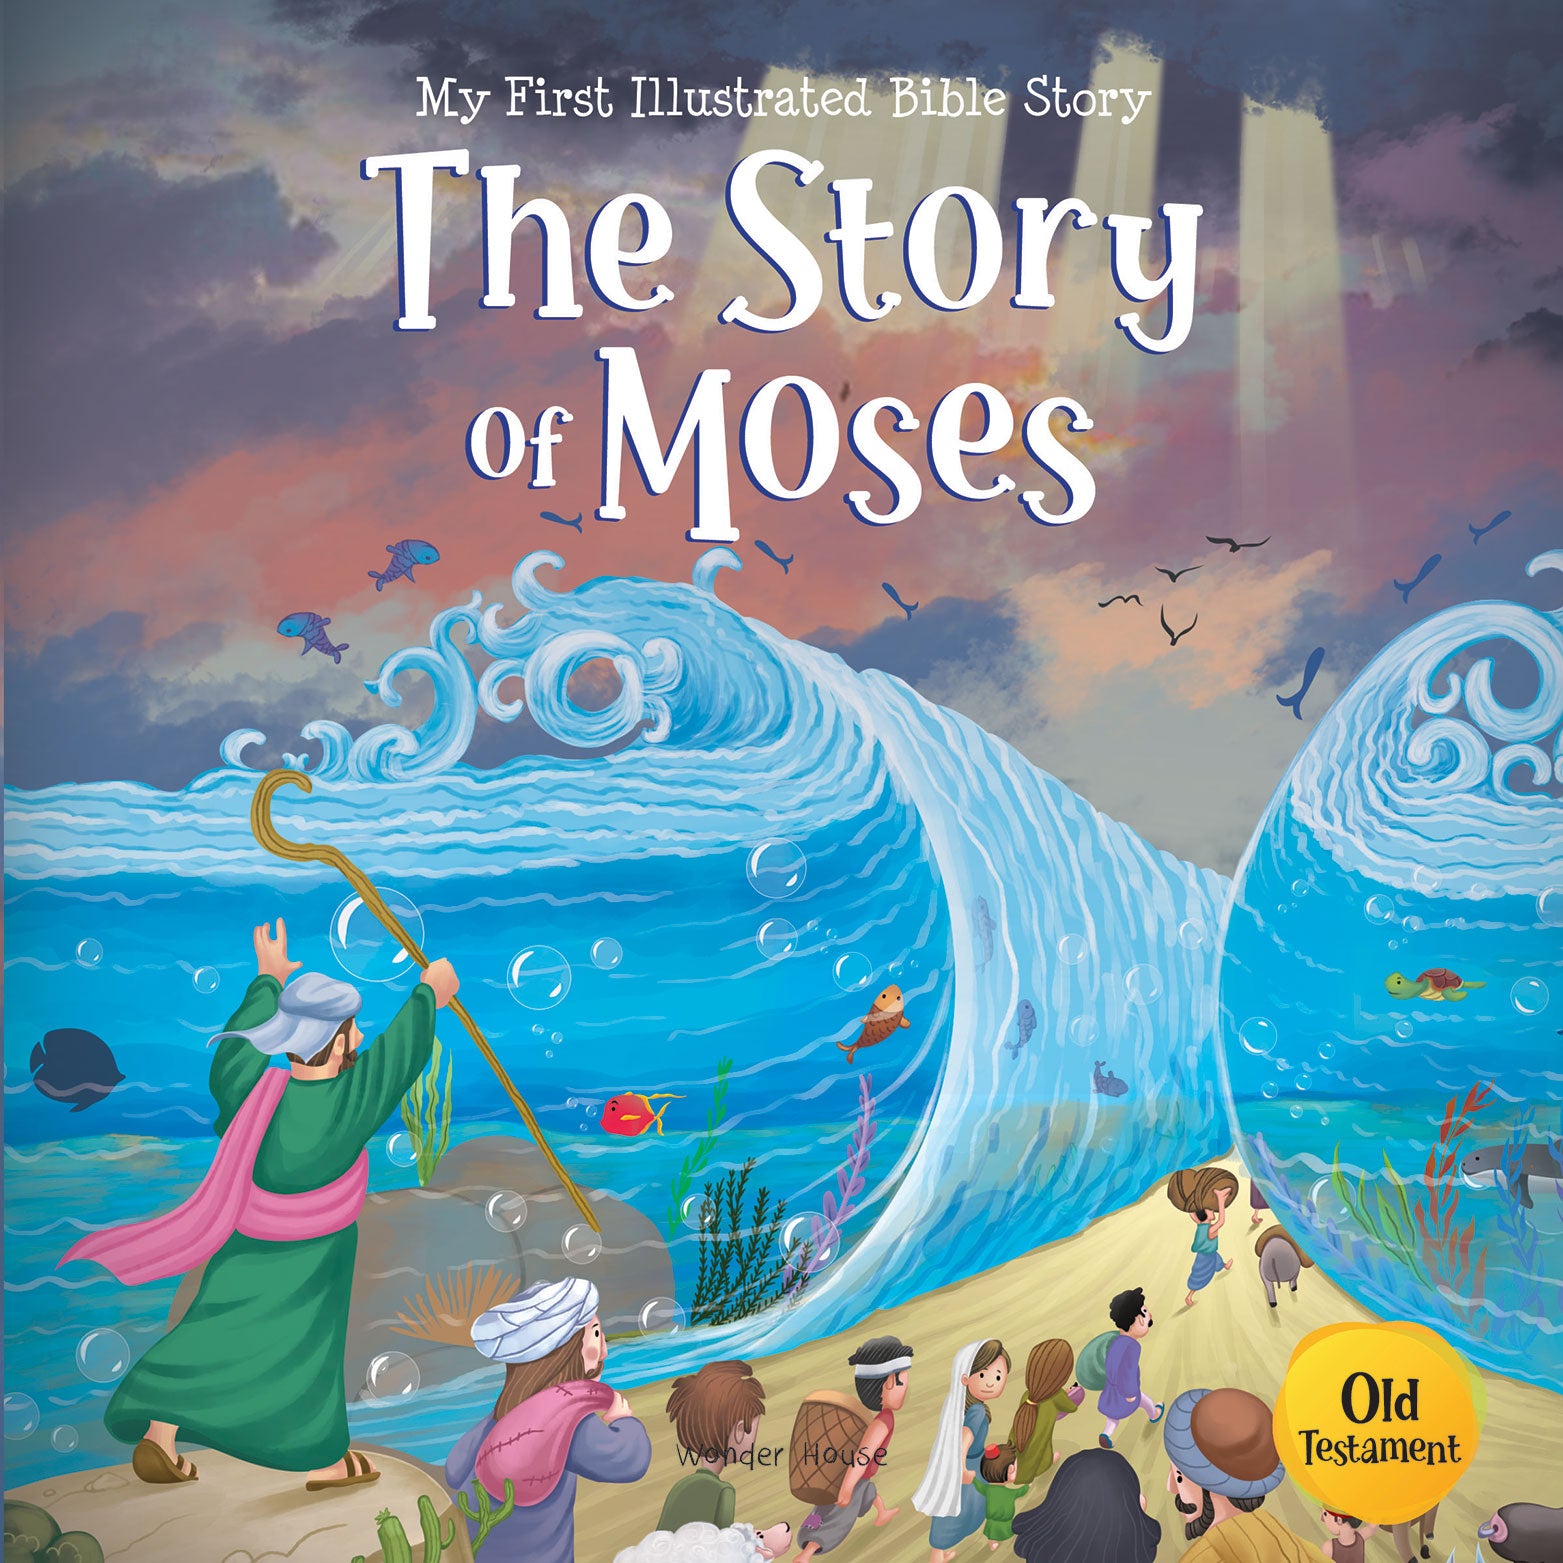 My First Illustrated Bible Story: The Story of Moses